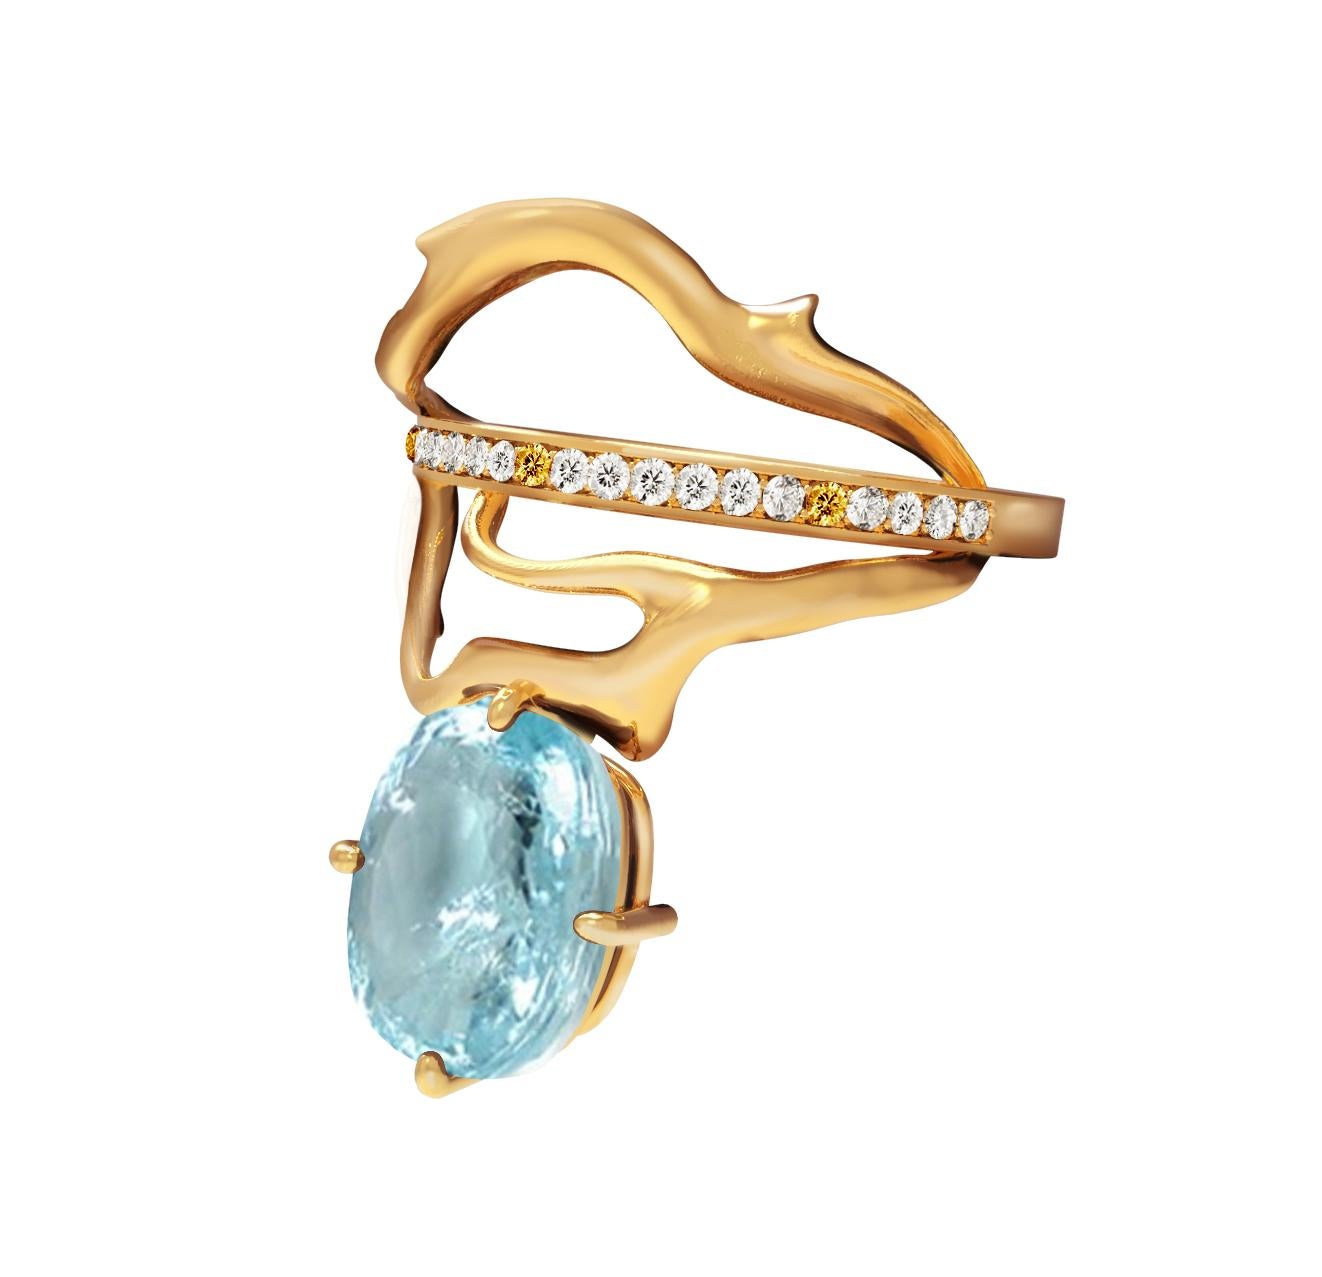 18 Karat Yellow Gold Diamonds Ring with Copper Bearing Paraiba Tourmaline In New Condition For Sale In Berlin, DE